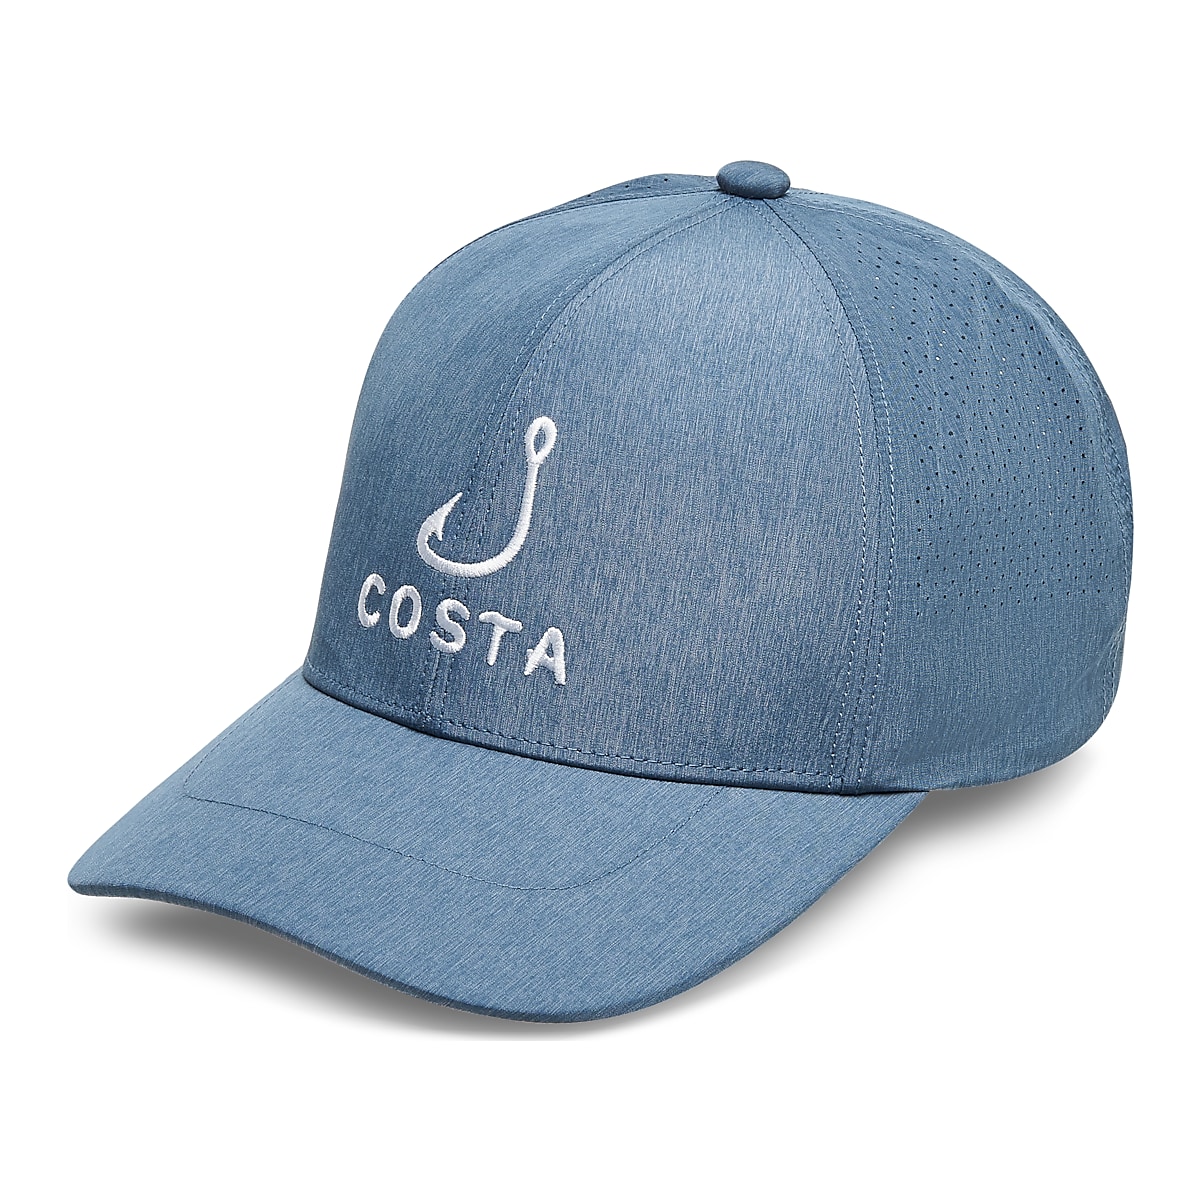 New shipment of Costa Hats. - Downtown Bait & Tackle Shop